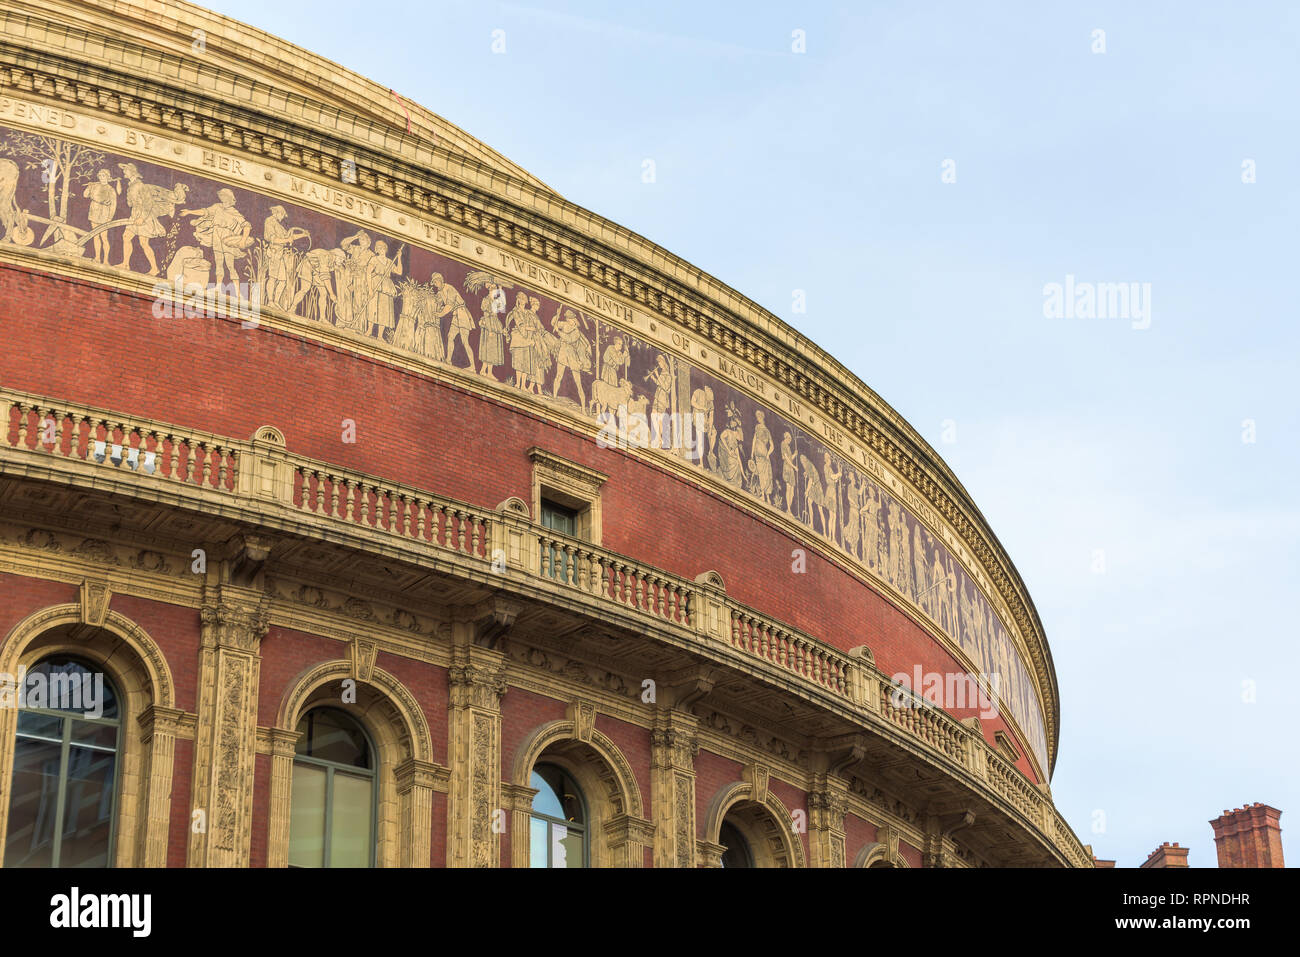 The Royal Albert Hall, a concert hall on the northern edge of South Kensington, London, which has held the Proms concerts annually each summer. Stock Photo